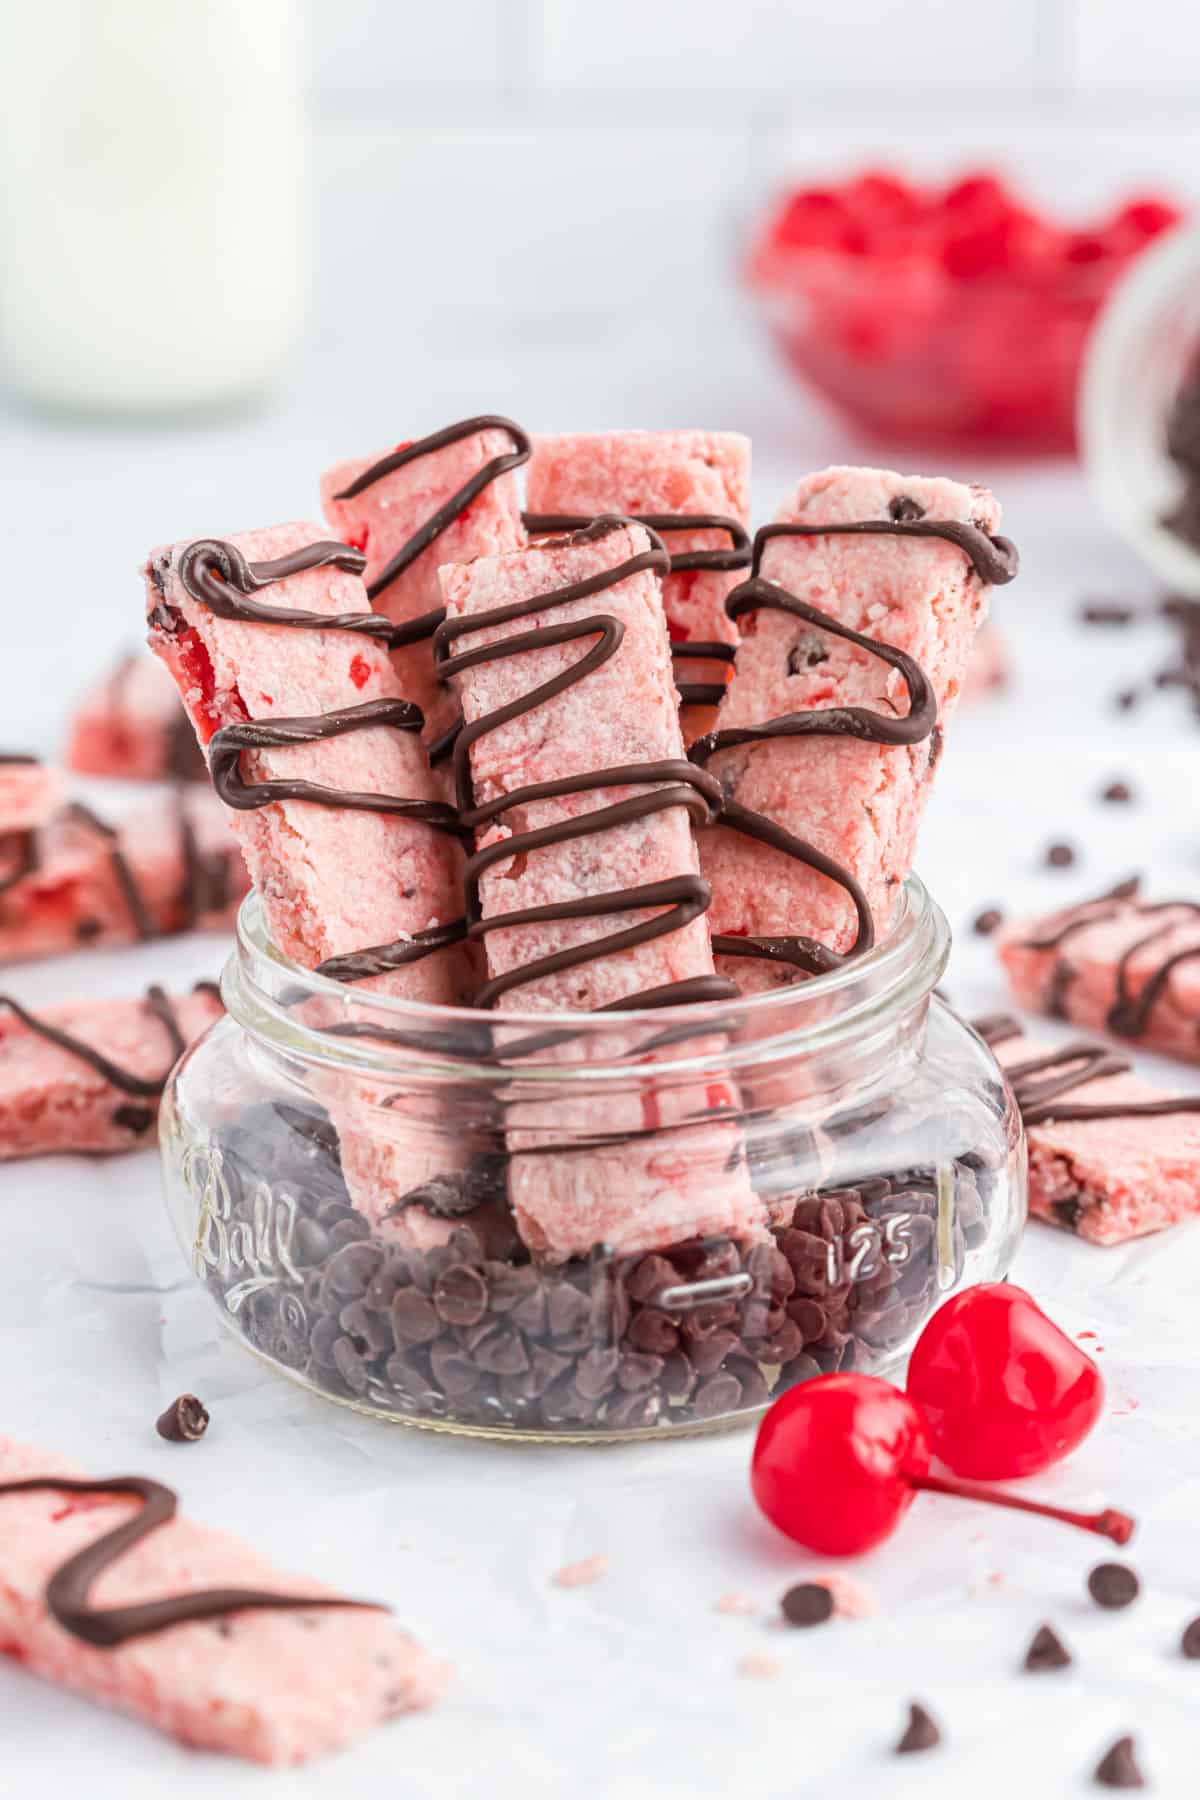 Cherry shortbread cookies in a small jar.